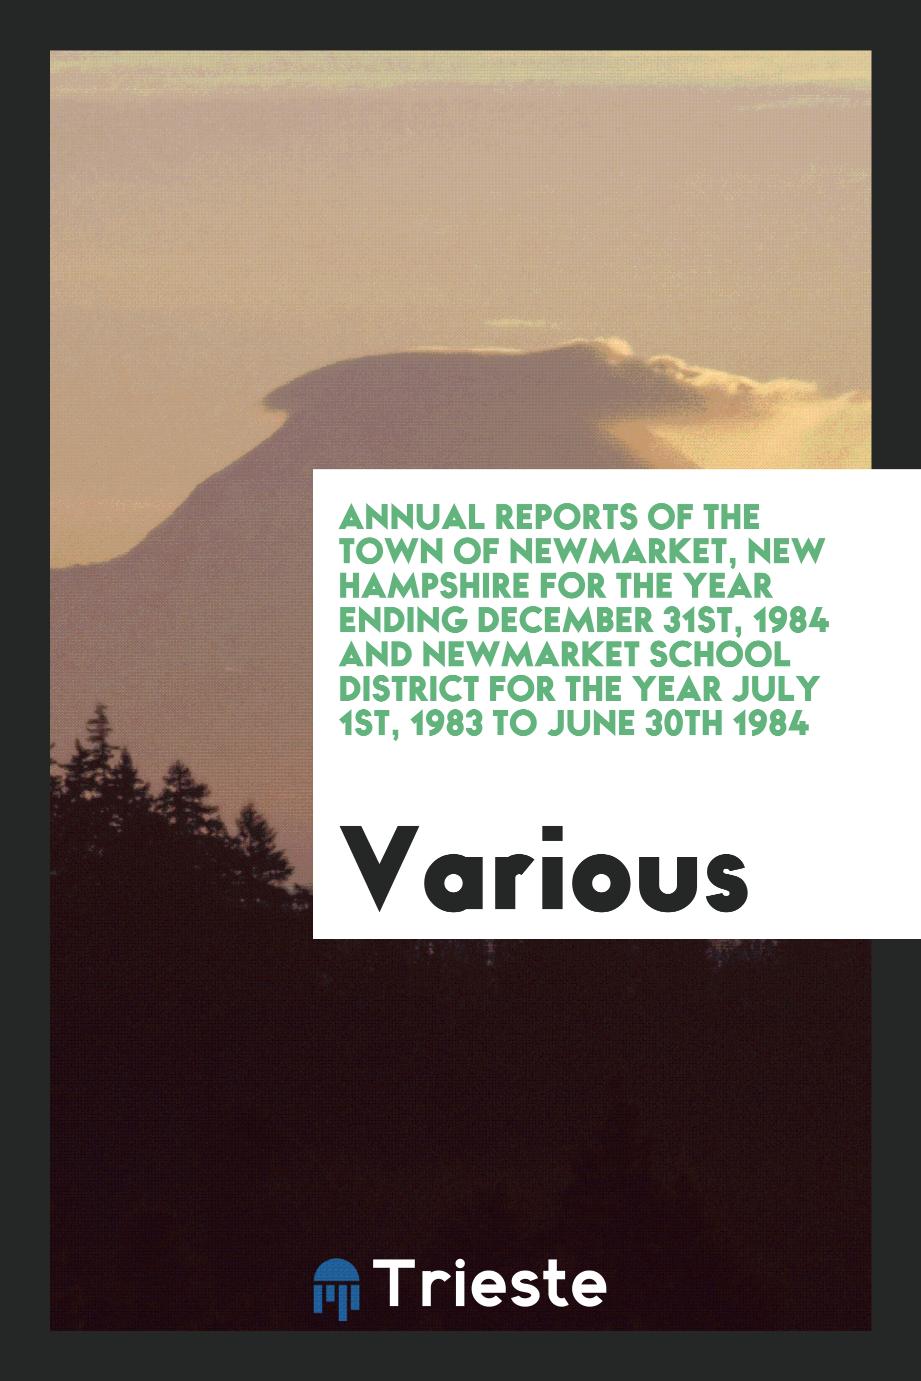 Annual Reports of the town of Newmarket, New Hampshire for the year ending December 31st, 1984 and Newmarket school district for the year July 1st, 1983 to June 30th 1984